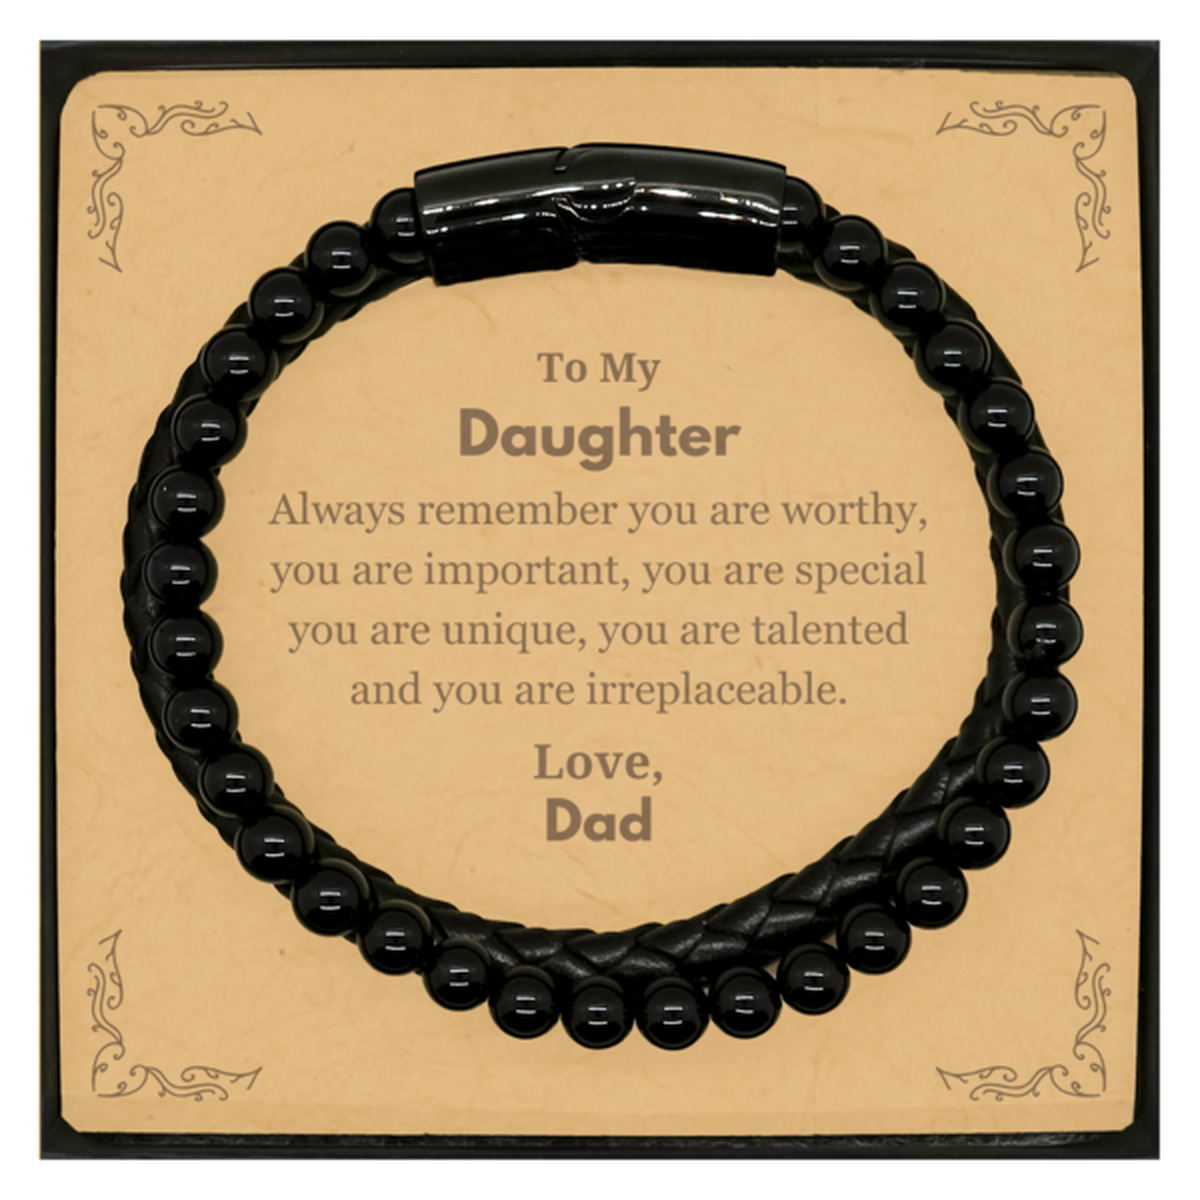 Daughter Birthday Gifts from Dad, Inspirational Stone Leather Bracelets for Daughter Christmas Graduation Gifts for Daughter Always remember you are worthy, you are important. Love, Dad